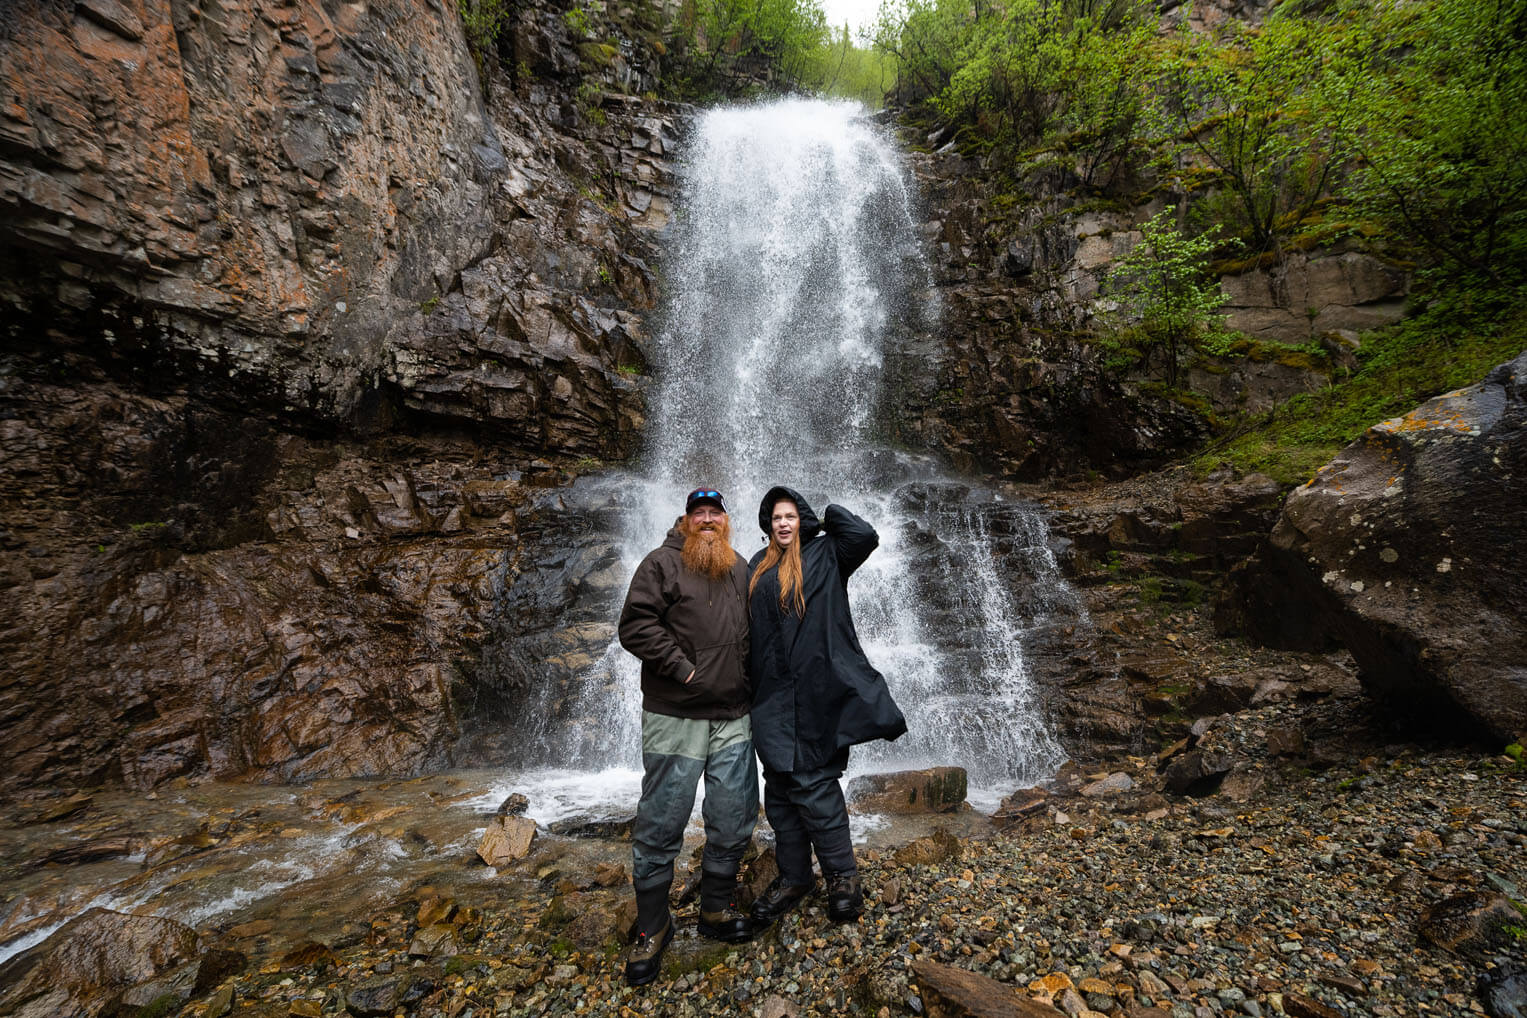 The Dickinson's enjoyed time exploring a waterfall near the shores of Lake Clark.